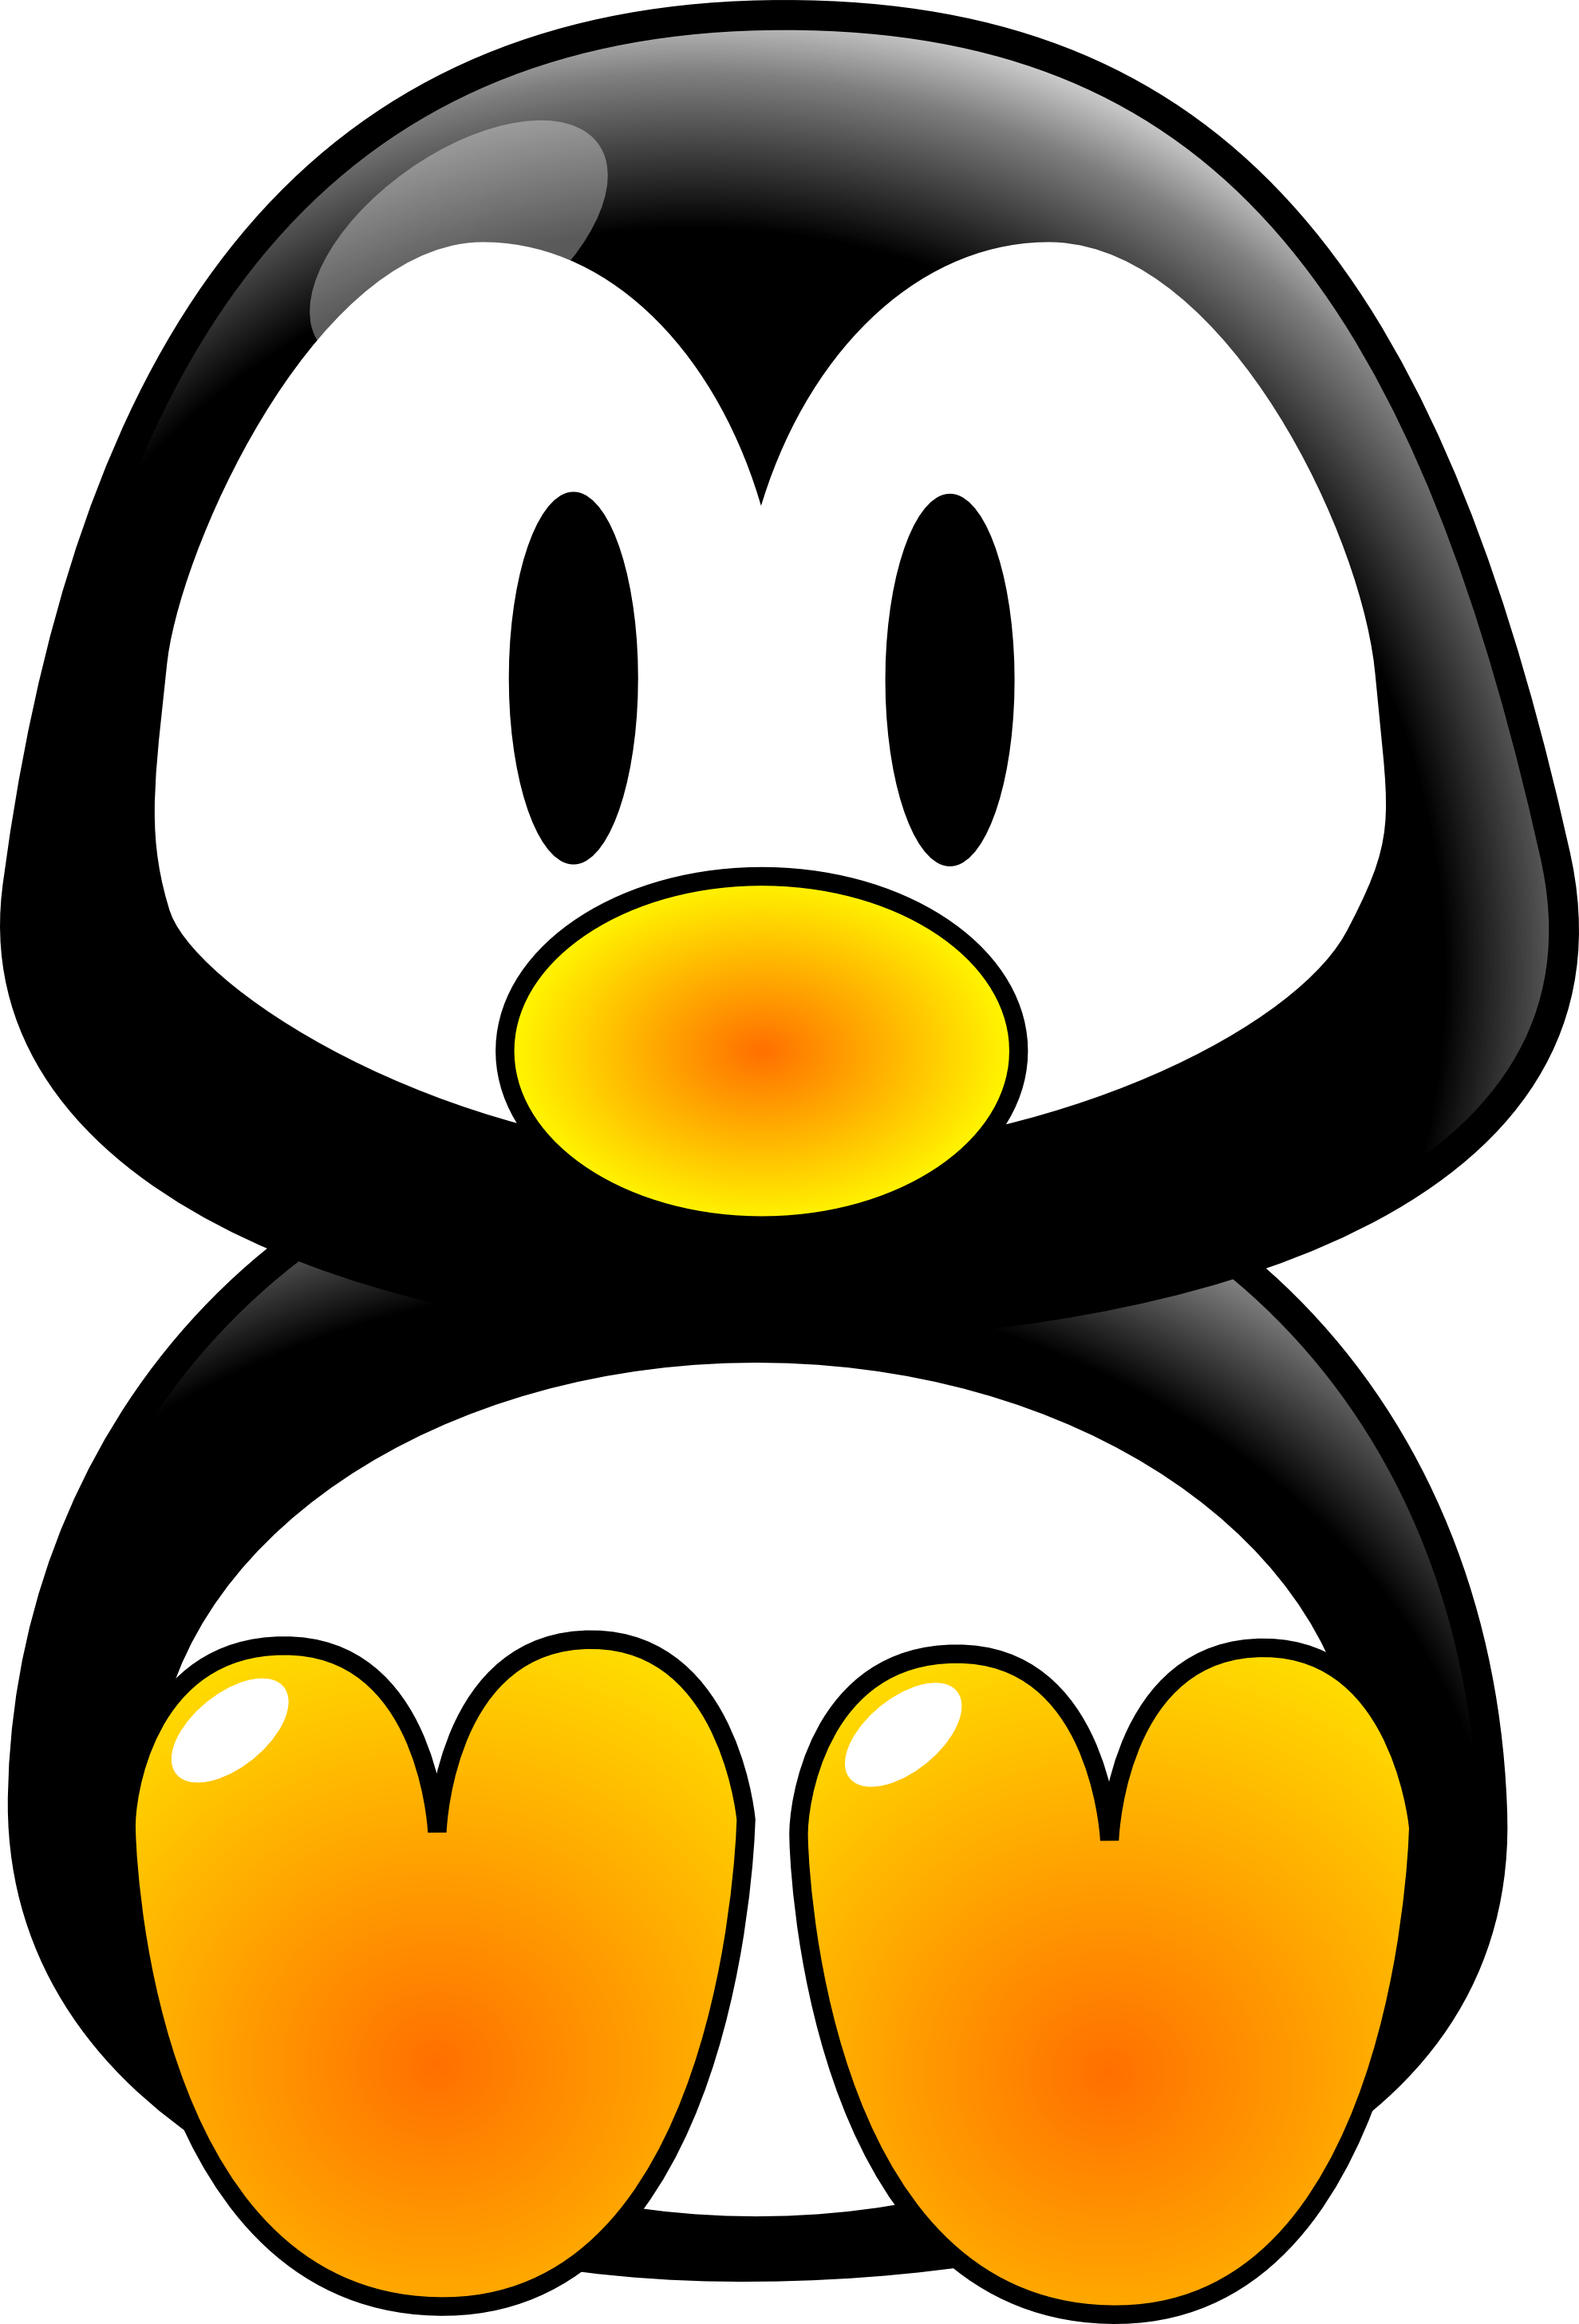 Linux clipart #9, Download drawings